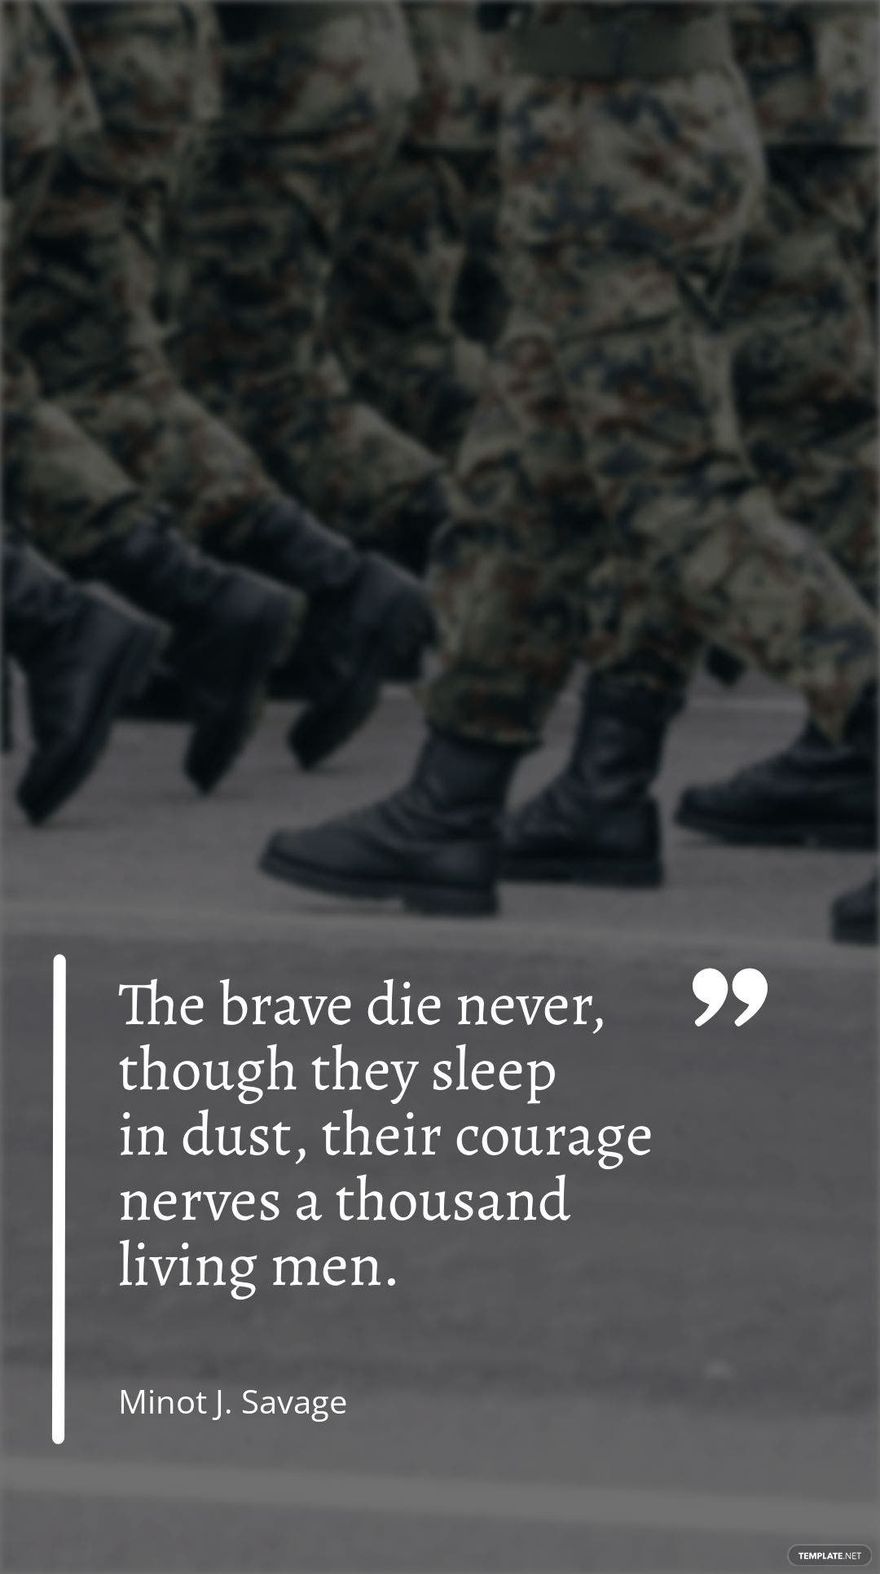 Free Minot J. Savage - ”The brave die never, though they sleep in dust, their courage nerves a thousand living men.”